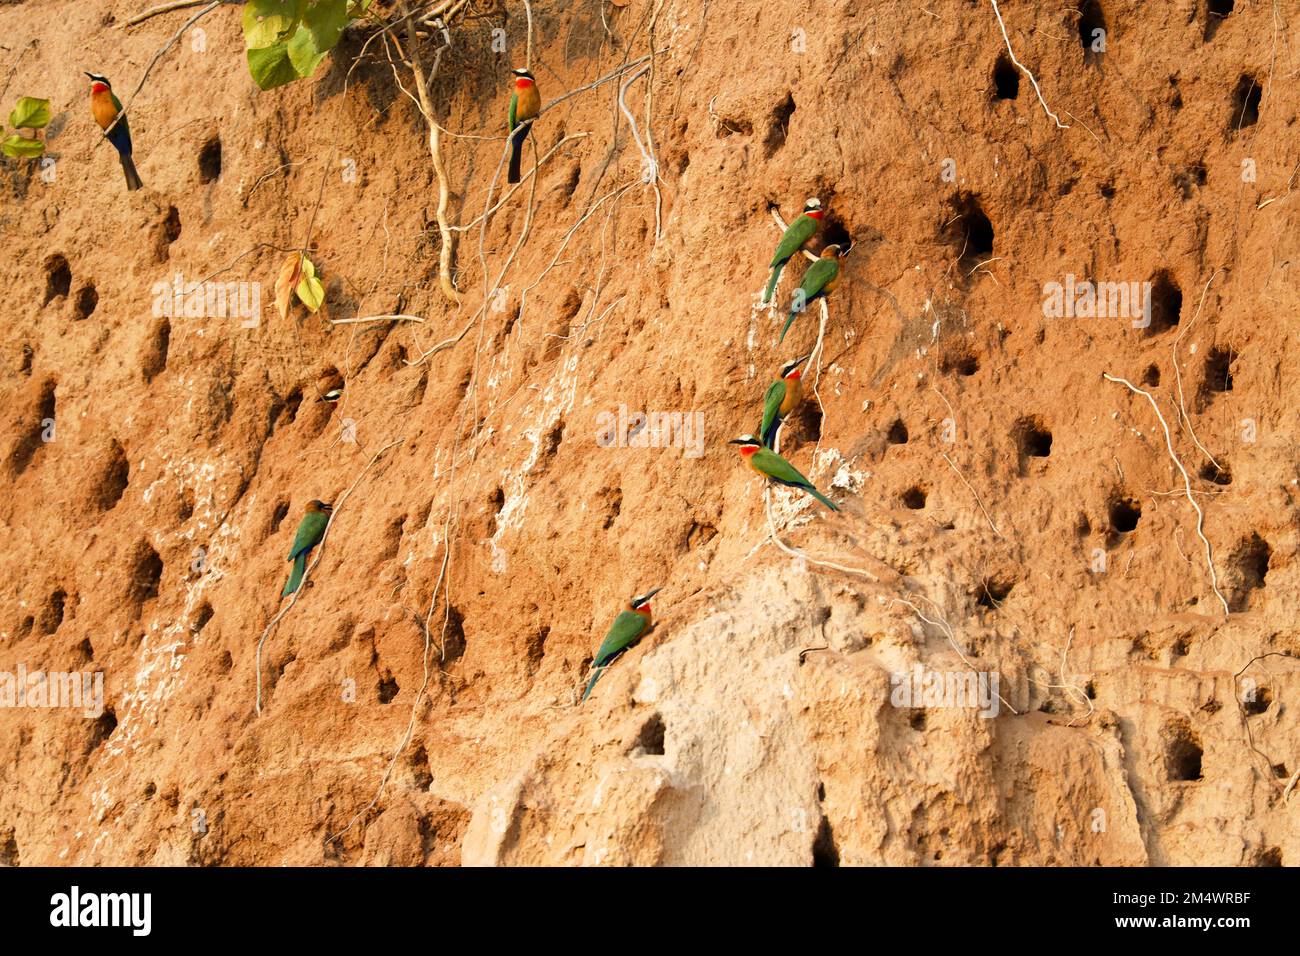 White-fronted Bee-eaters nest in large colonies, digging tunnels up to 2 meters long on the soft alluvium of riverbanks around Africa. Stock Photo